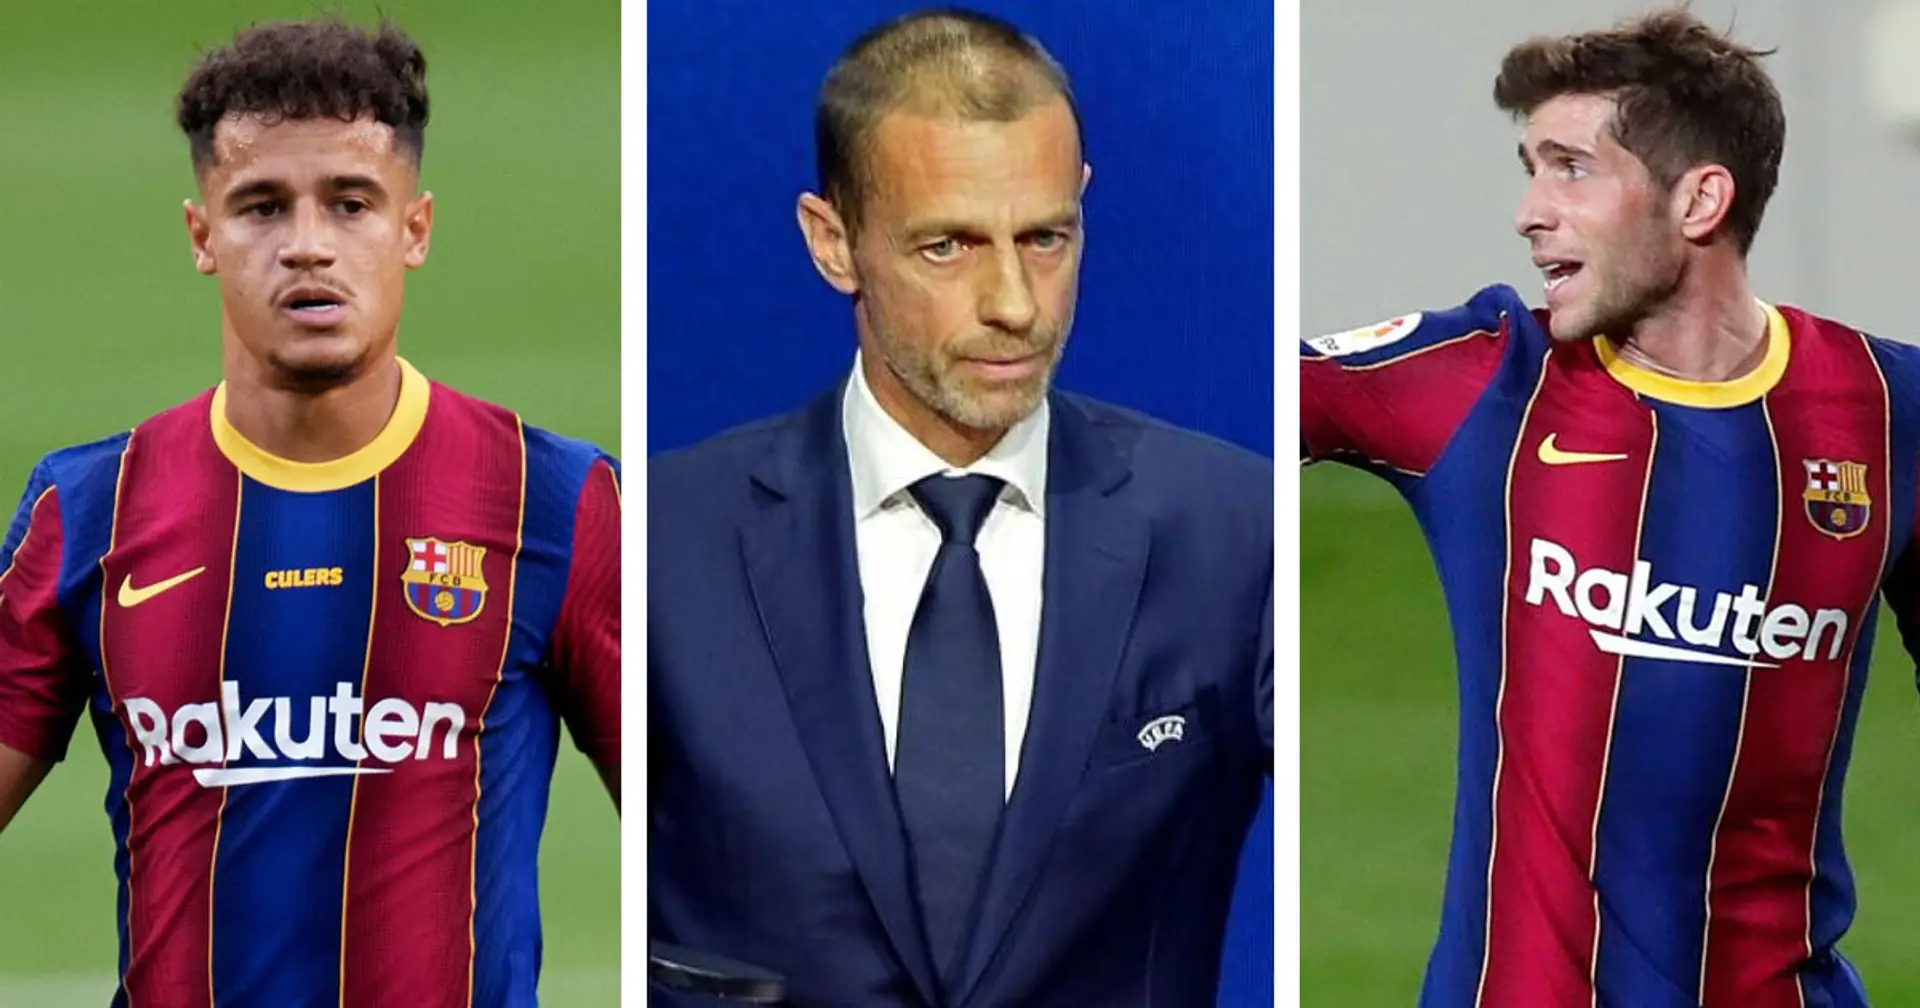 Ceferin threatens to kick Barca out of UCL and 3 more big stories you might've missed